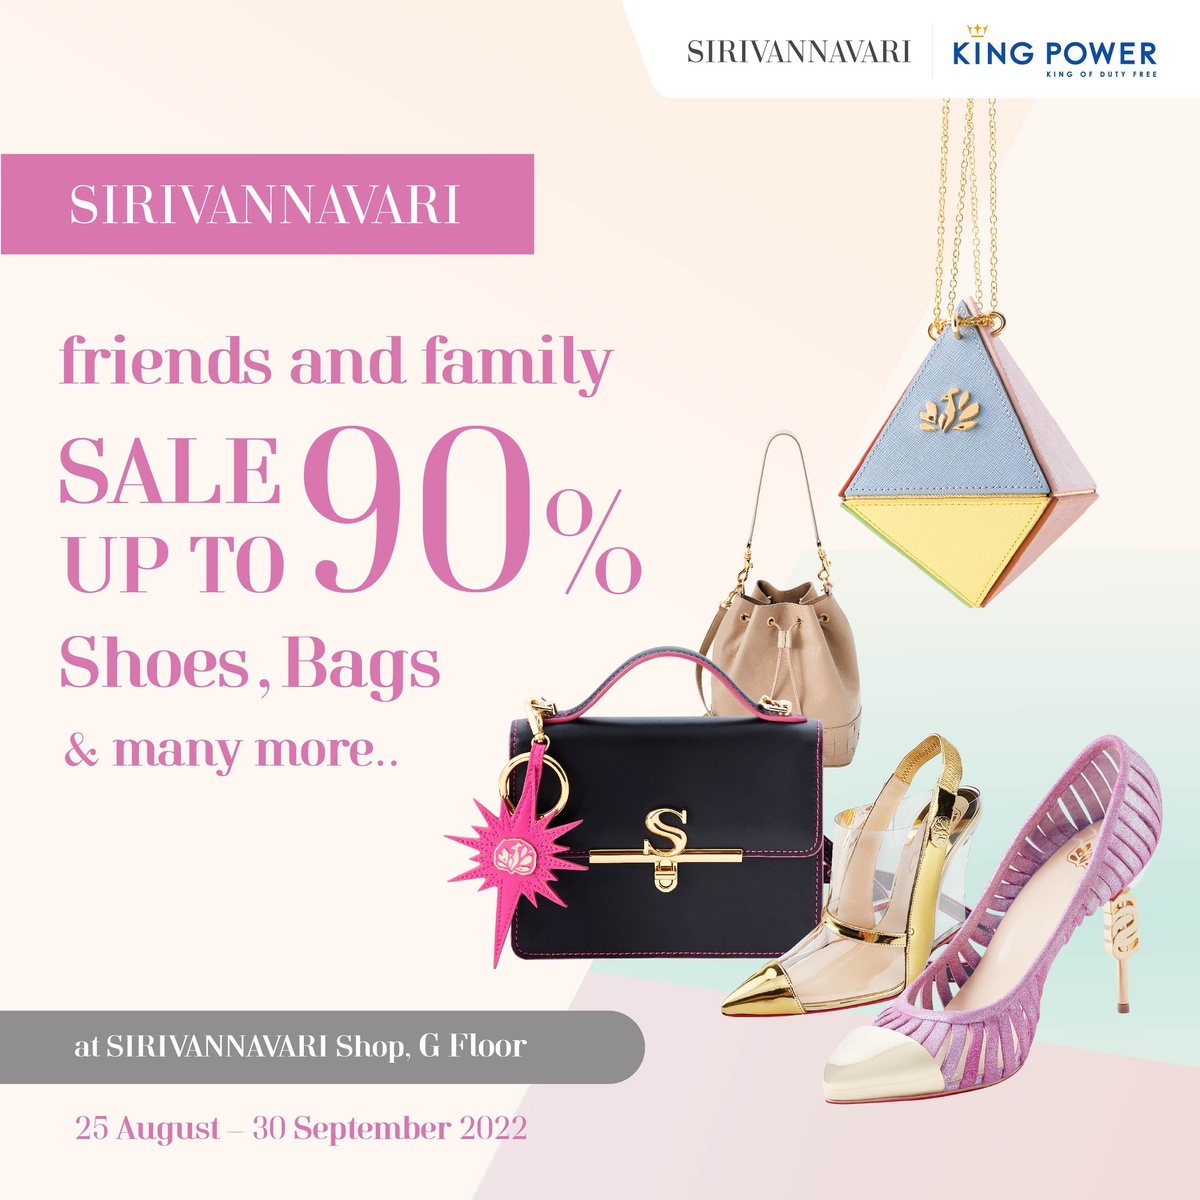 SIRIVANNAVARI Friends Family SALE 2022 Shoe Bags many more Up to 90% off